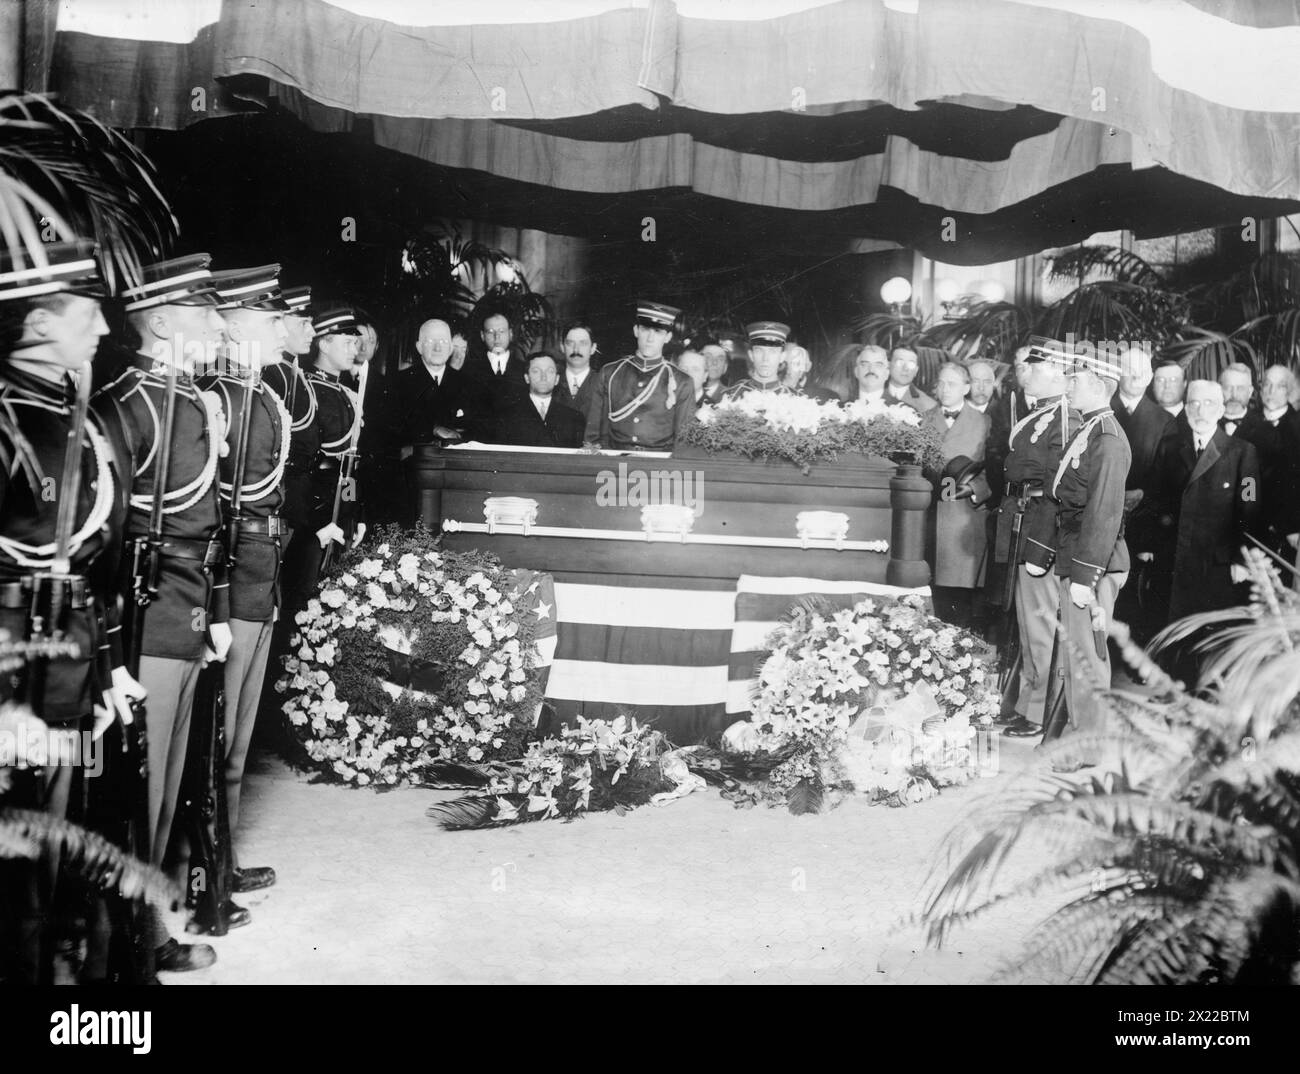 Vice Pres't. Sherman lying in state, 1912. Shows funeral on November 2, 1912 for James Schoolcraft Sherman (1855-1912), Vice President under William Howard Taft, Utica, New York. Stock Photo